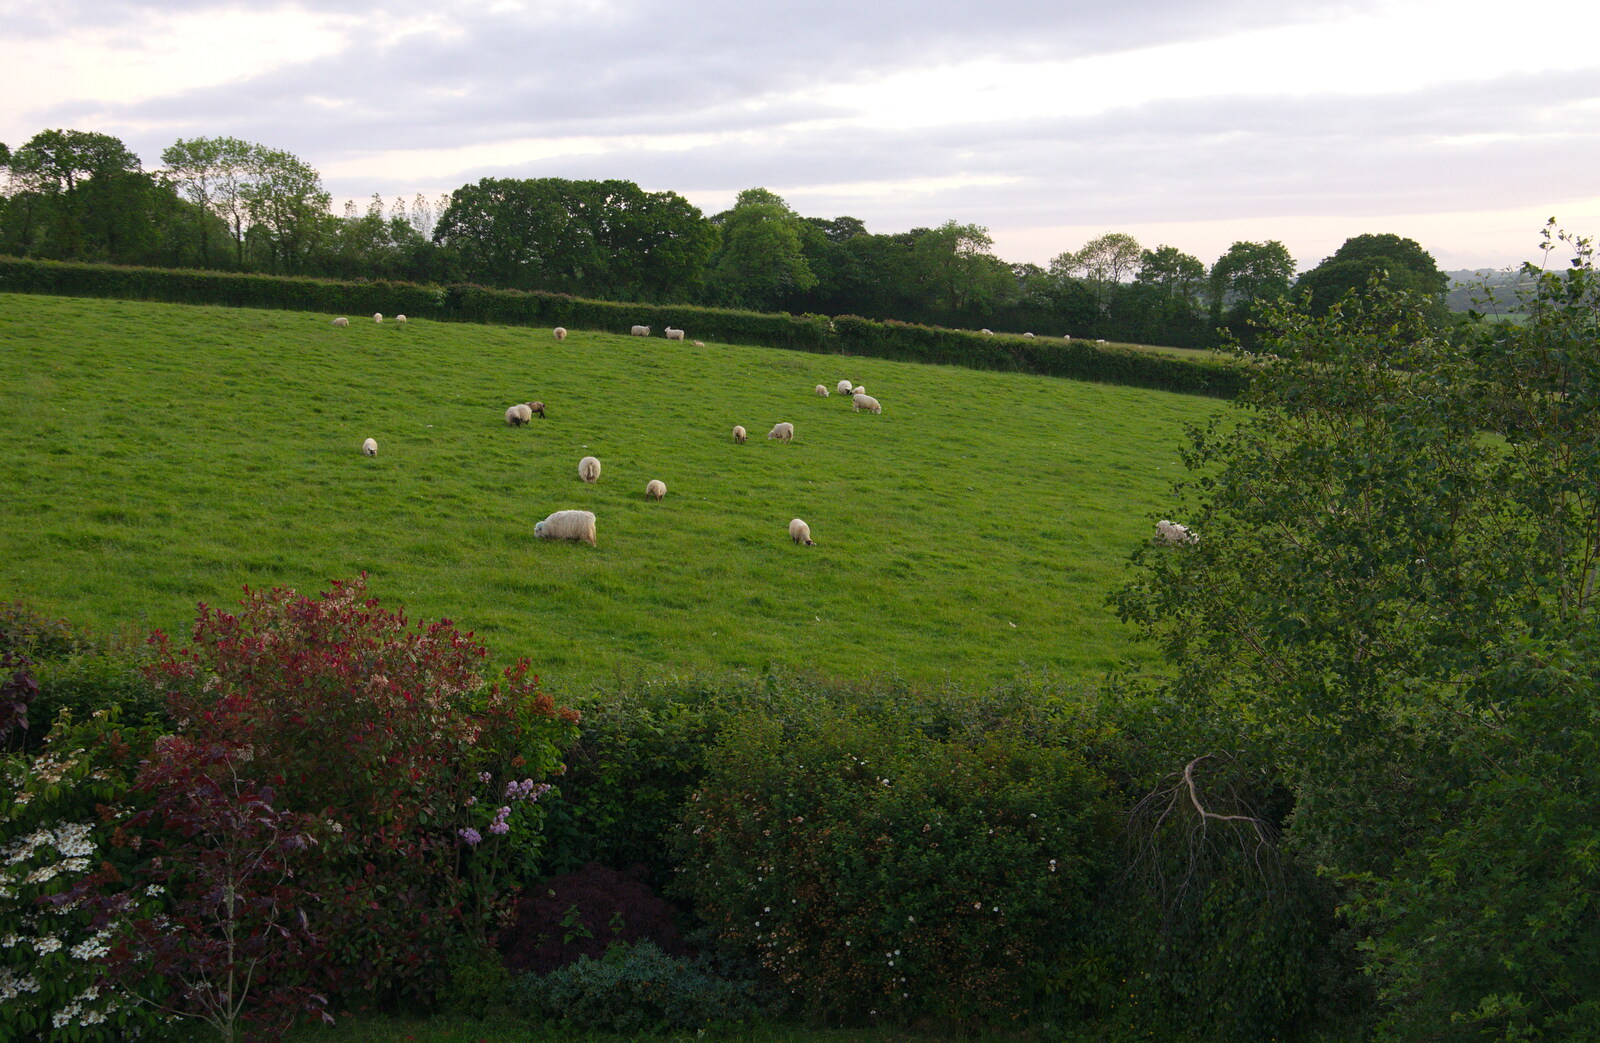 There's a field of sheep next to Mother's house from The Tom Cobley and a Return to Haytor, Bovey Tracey, Devon - 27th May 2019